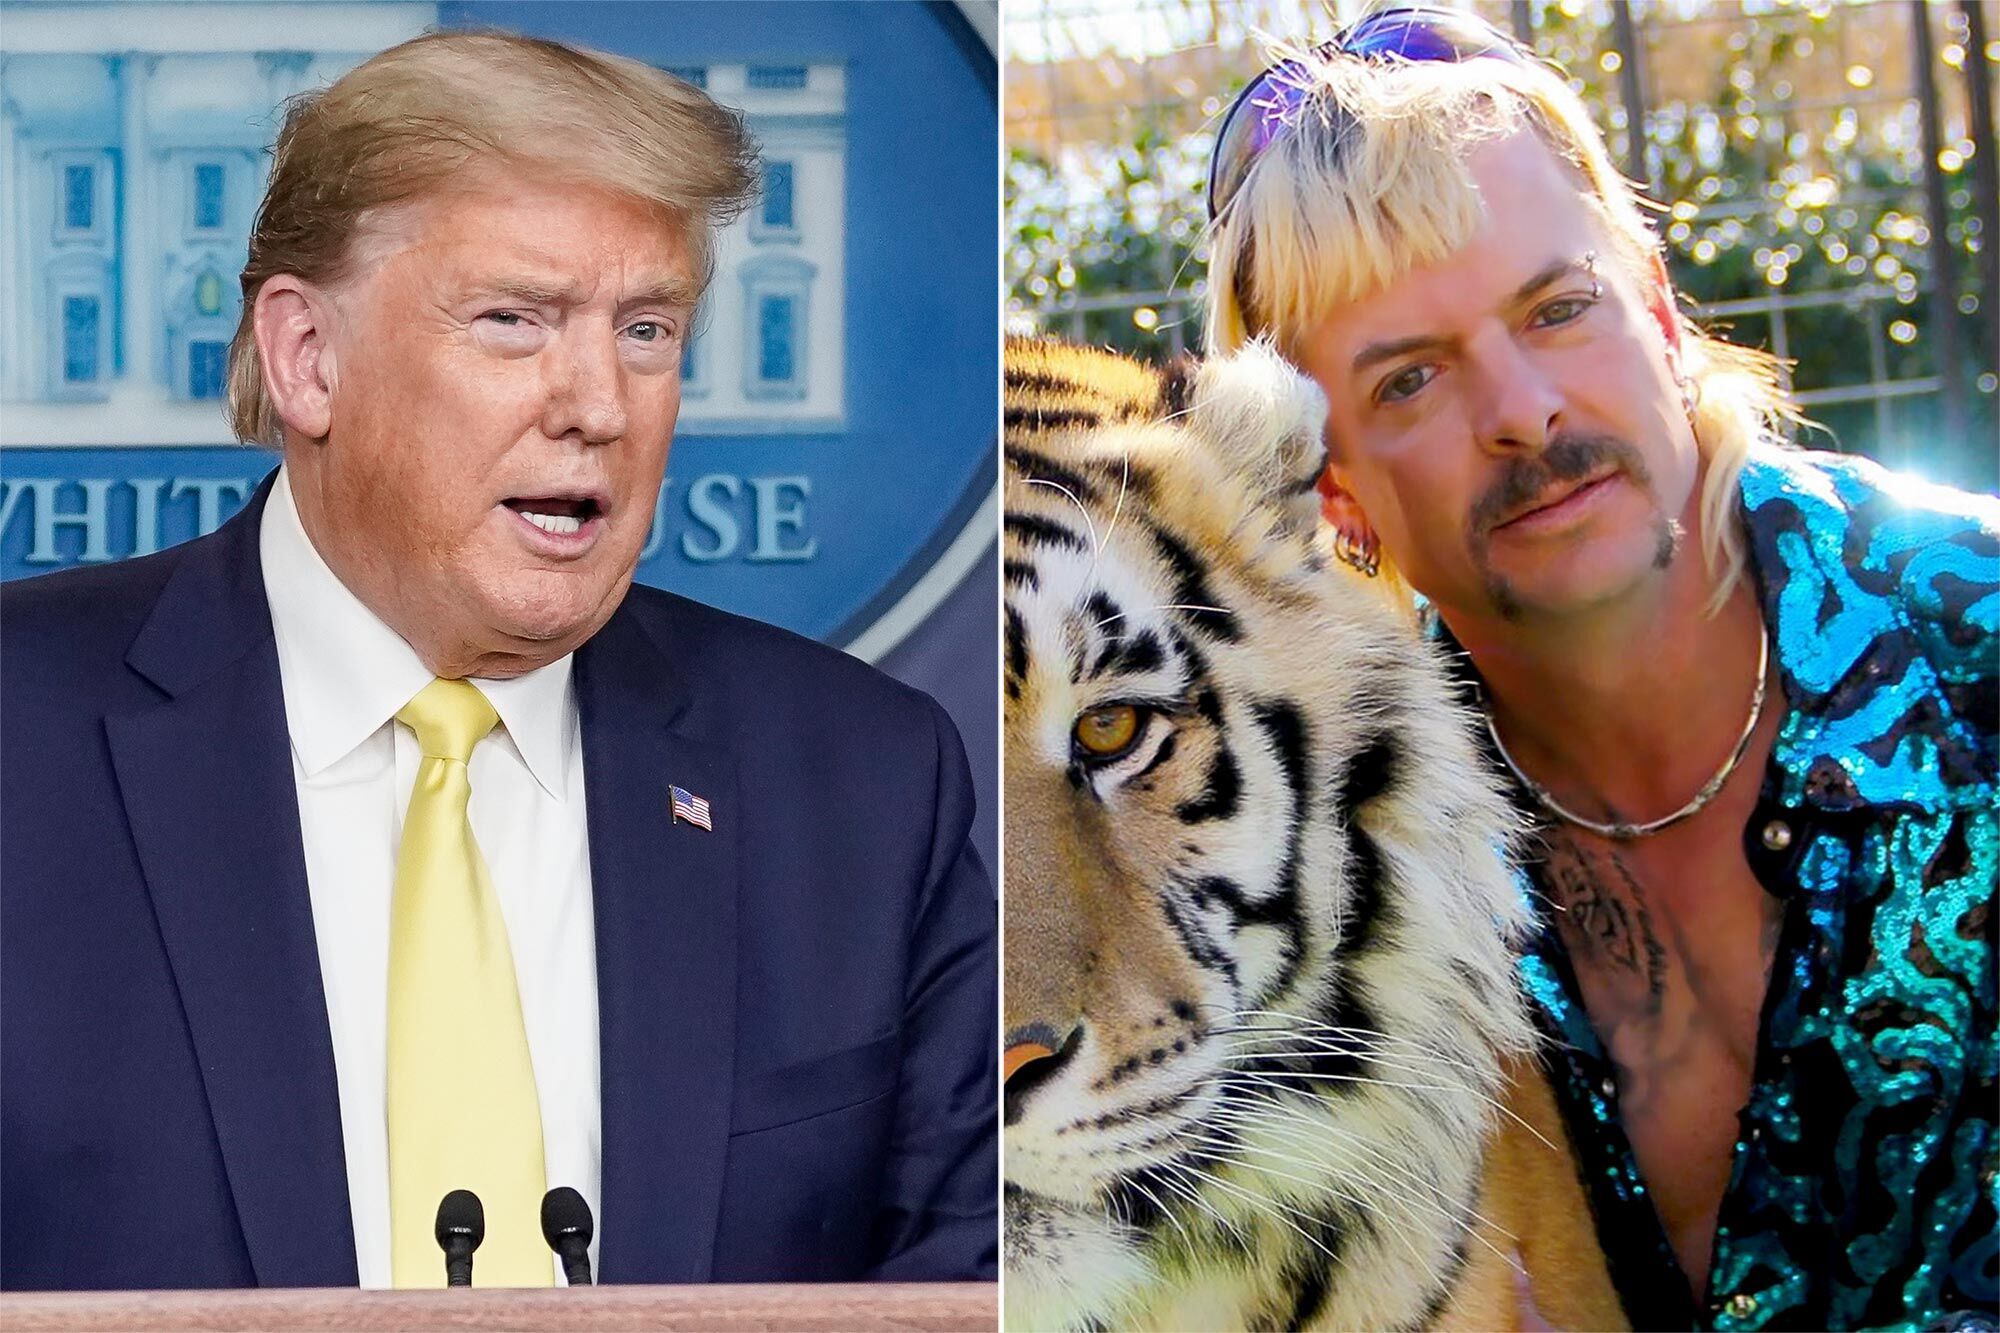 President Donald Trump and jailed former "zookeeper" Joe Exotic